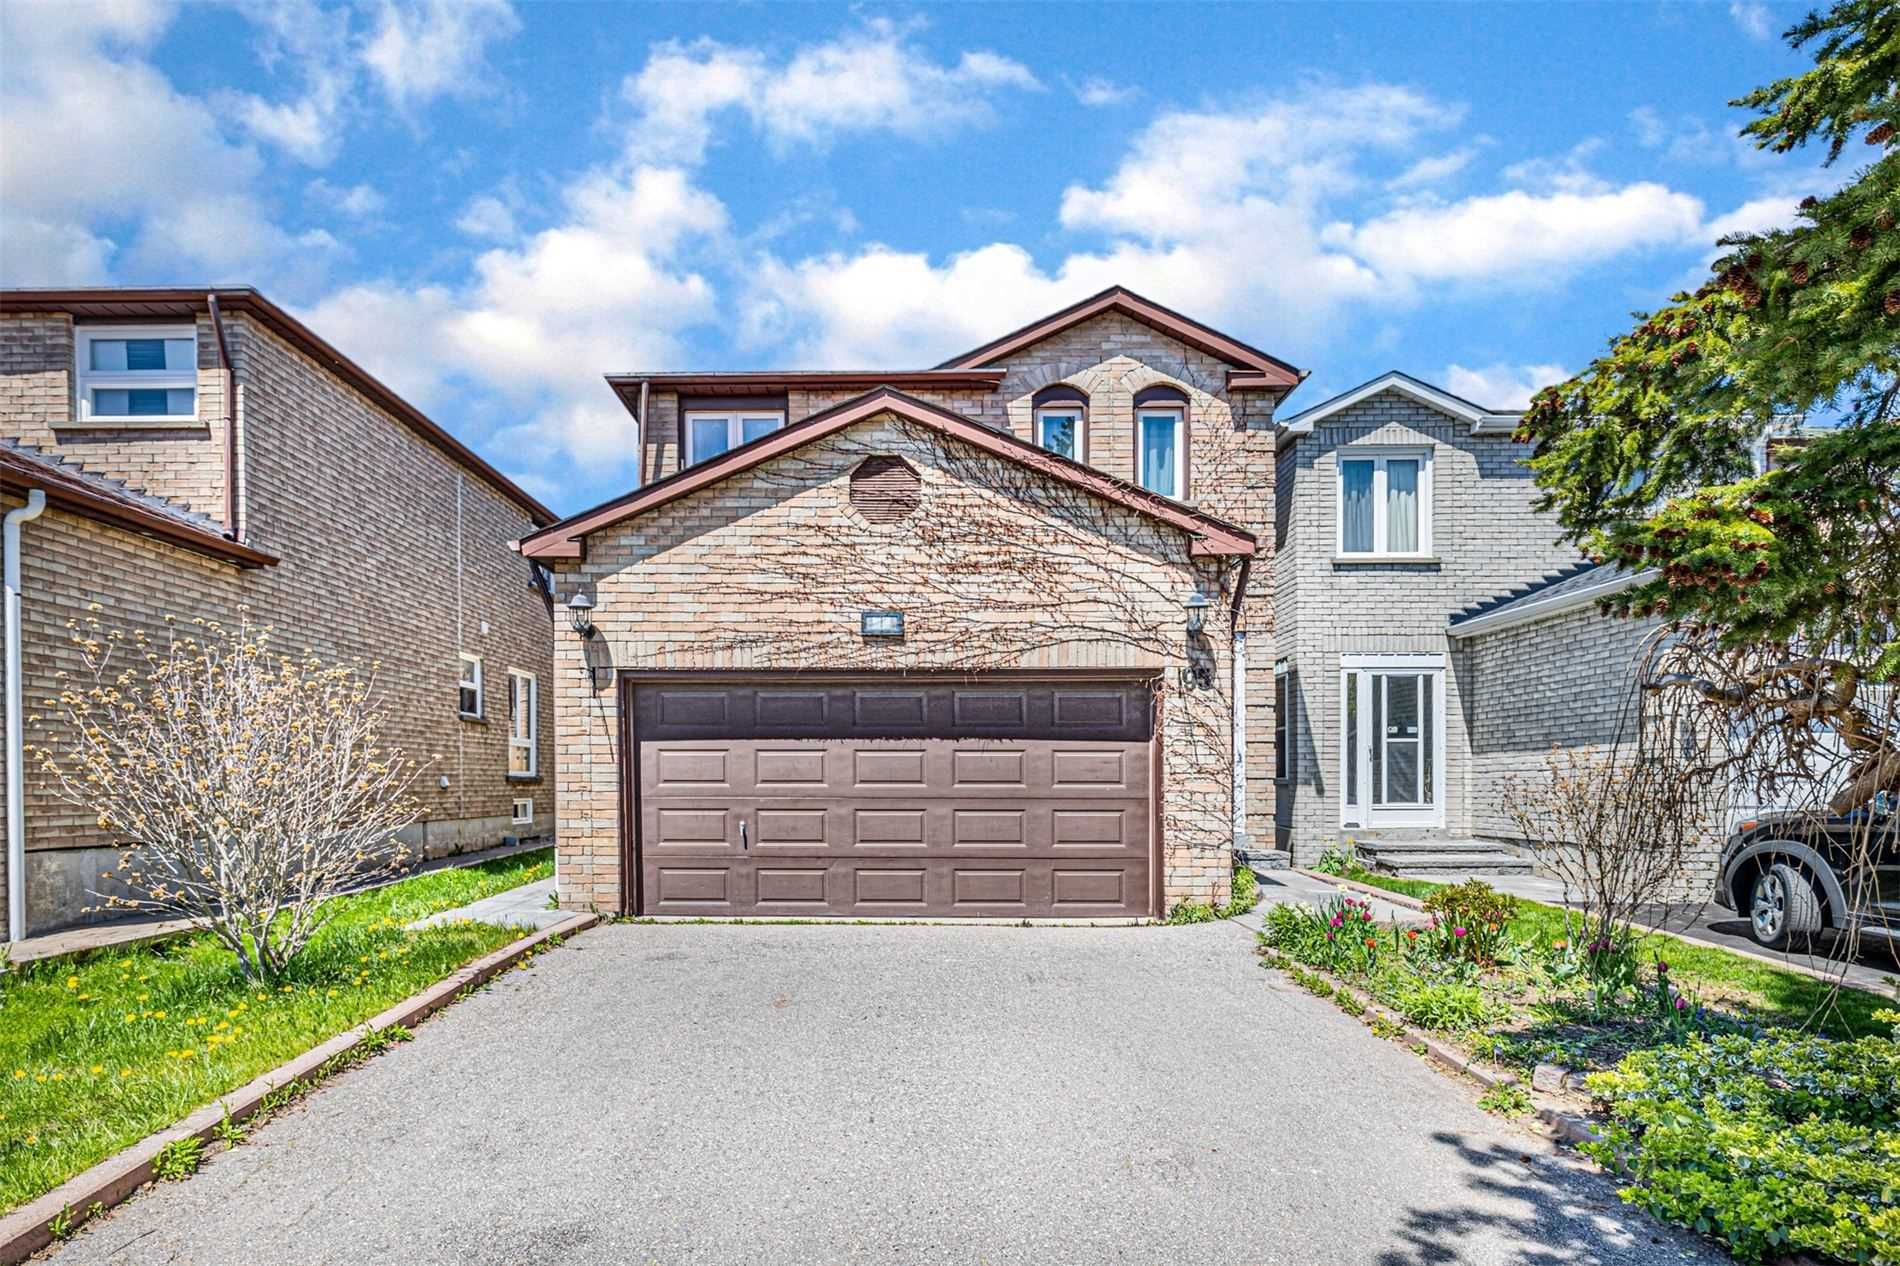 Main Photo: 95 Digby Crescent in Markham: Milliken Mills East House (2-Storey) for sale : MLS®# N5747889